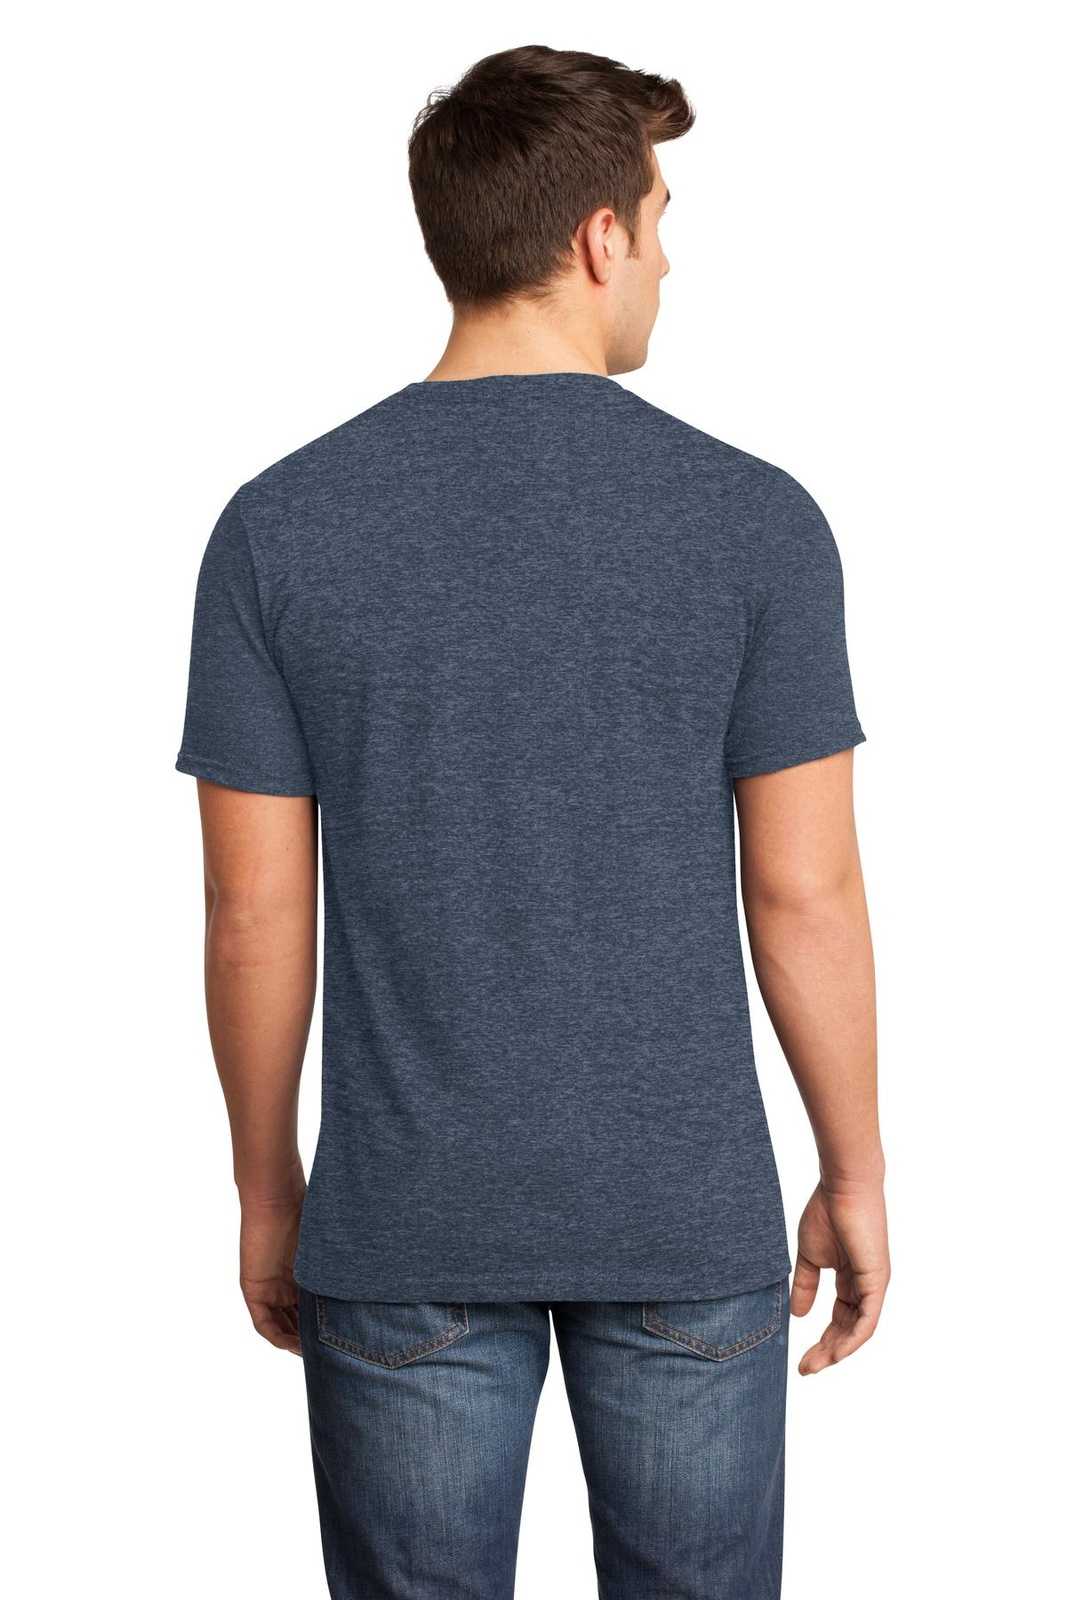 District DT6500 Very Important Tee V-Neck - Heathered Navy - HIT a Double - 1